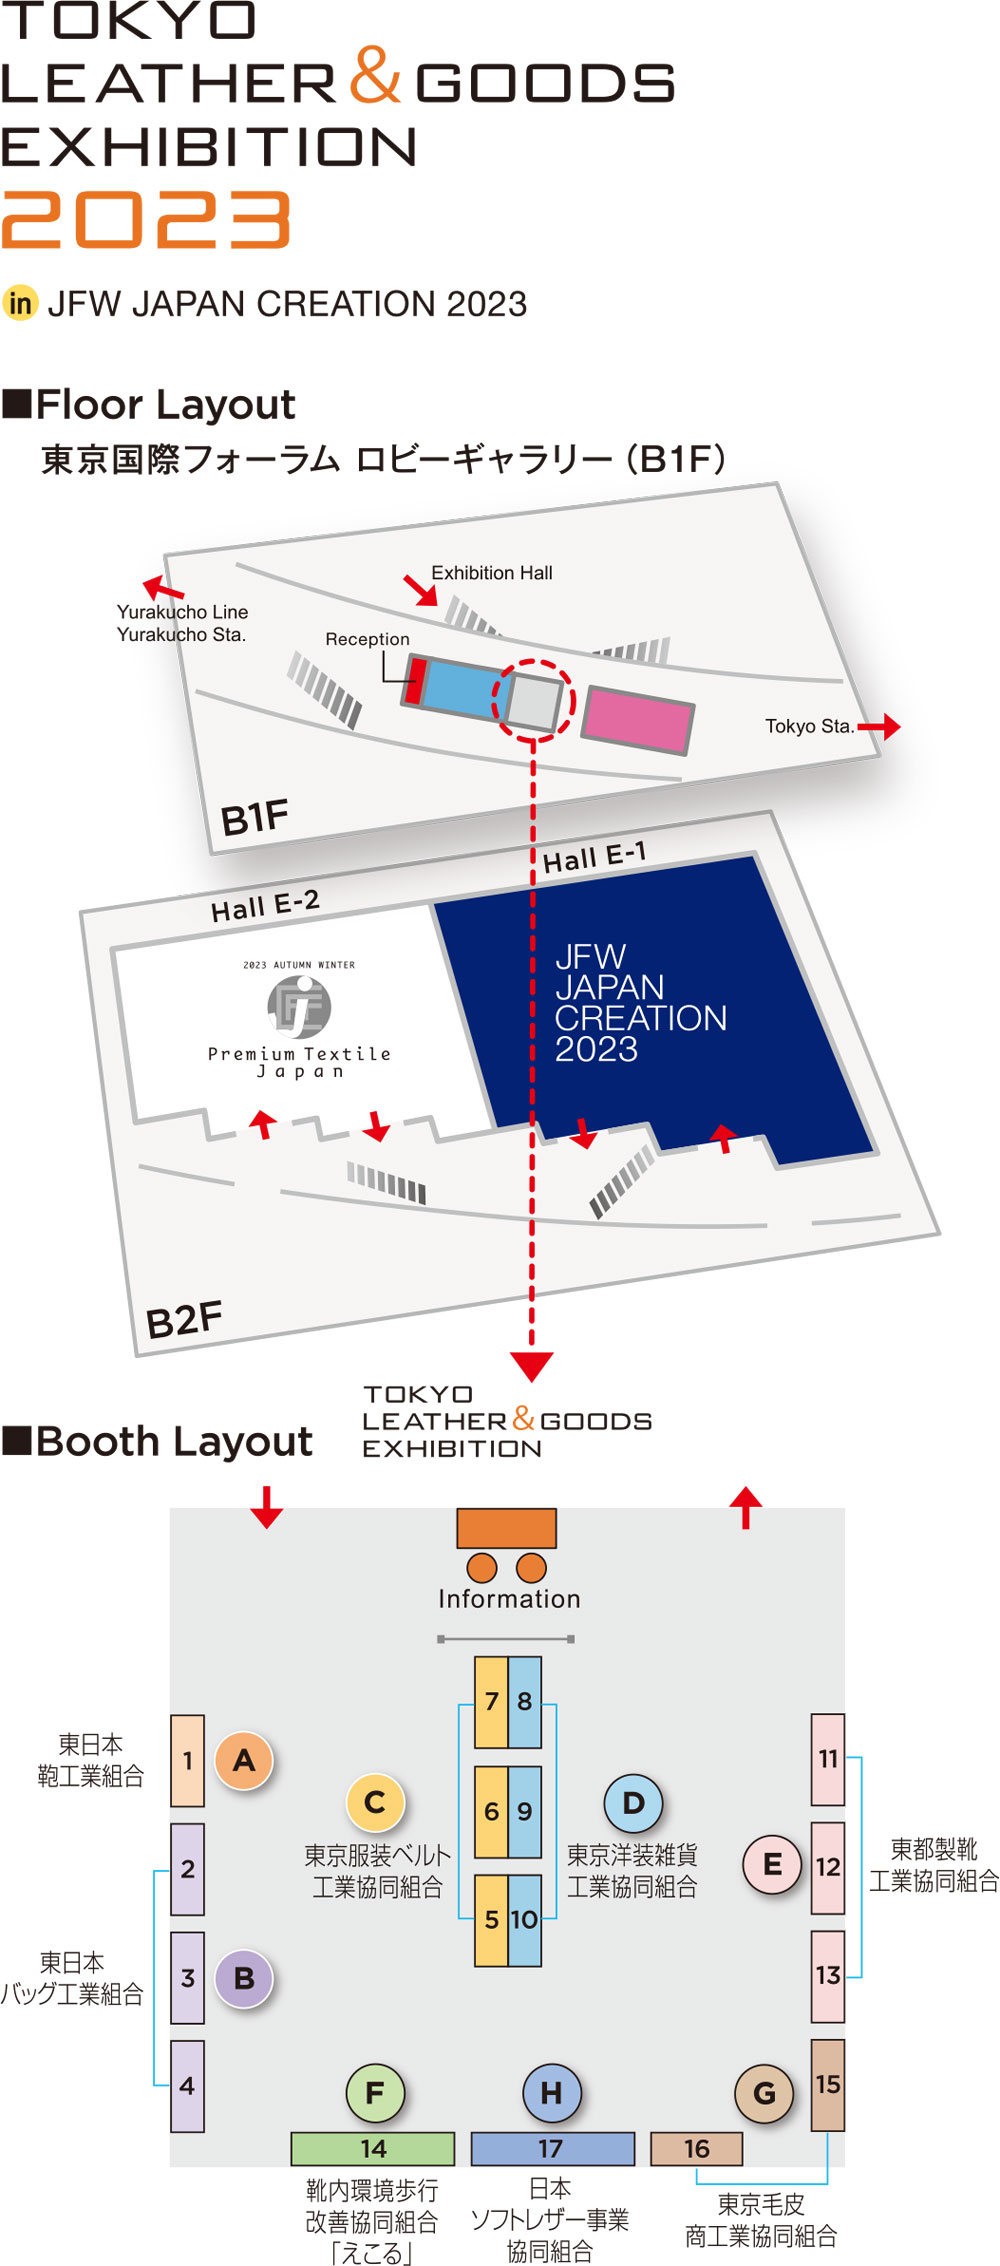 Floor Layout / Booth Layout